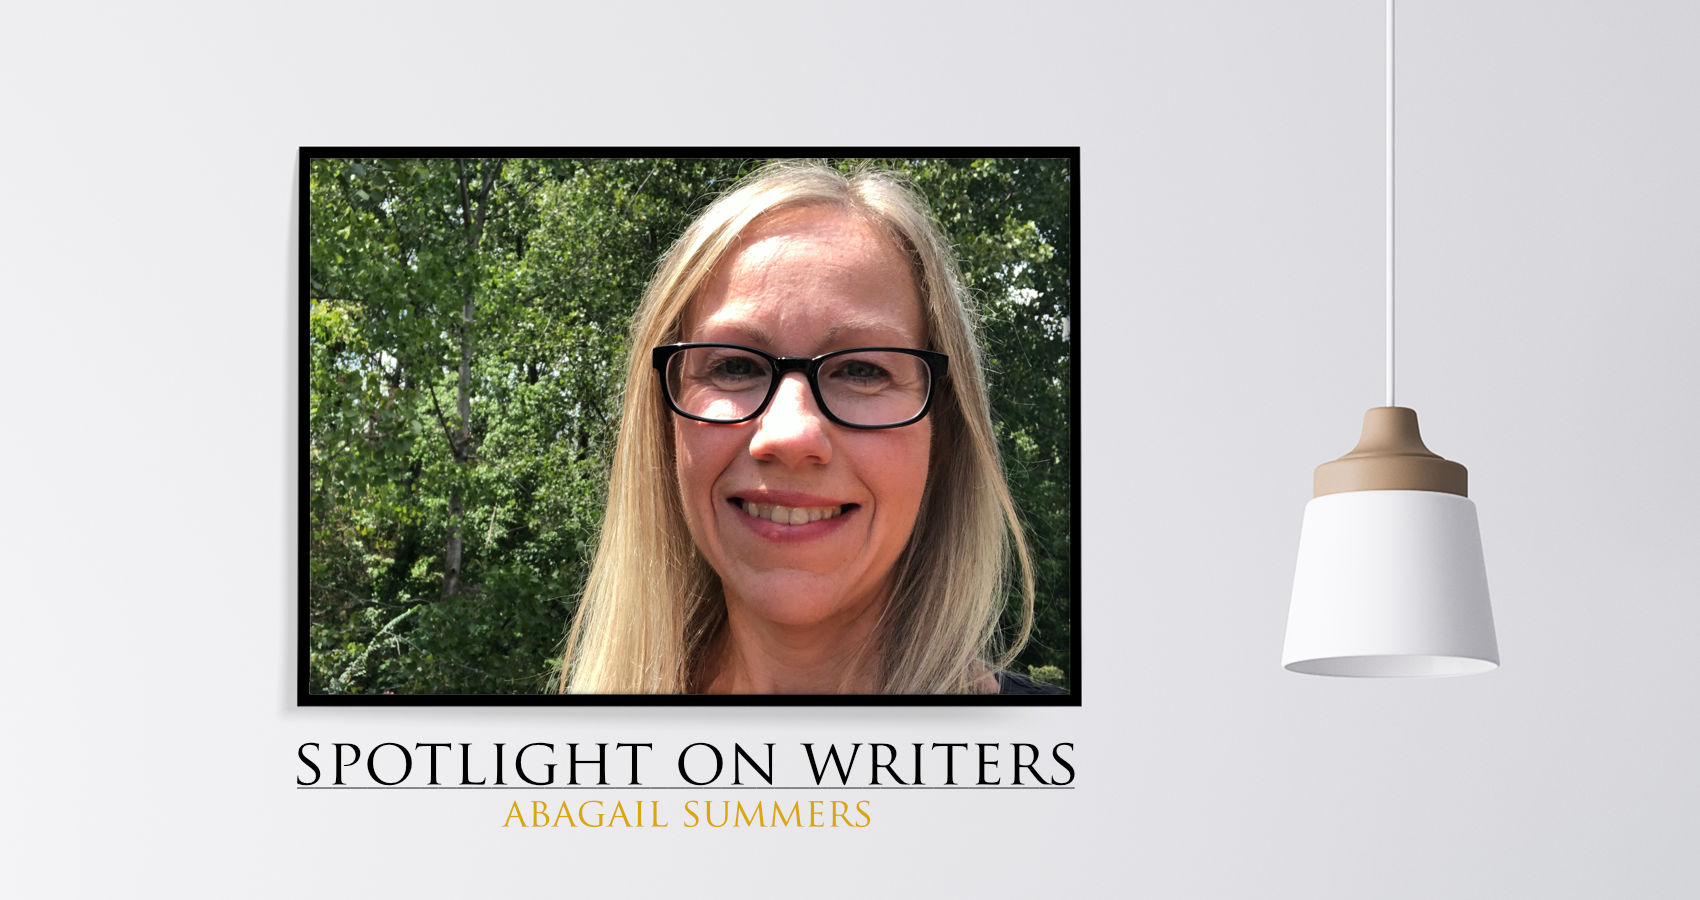 Spotlight On Writers - Abagail Summers, interview at Spillwords.com